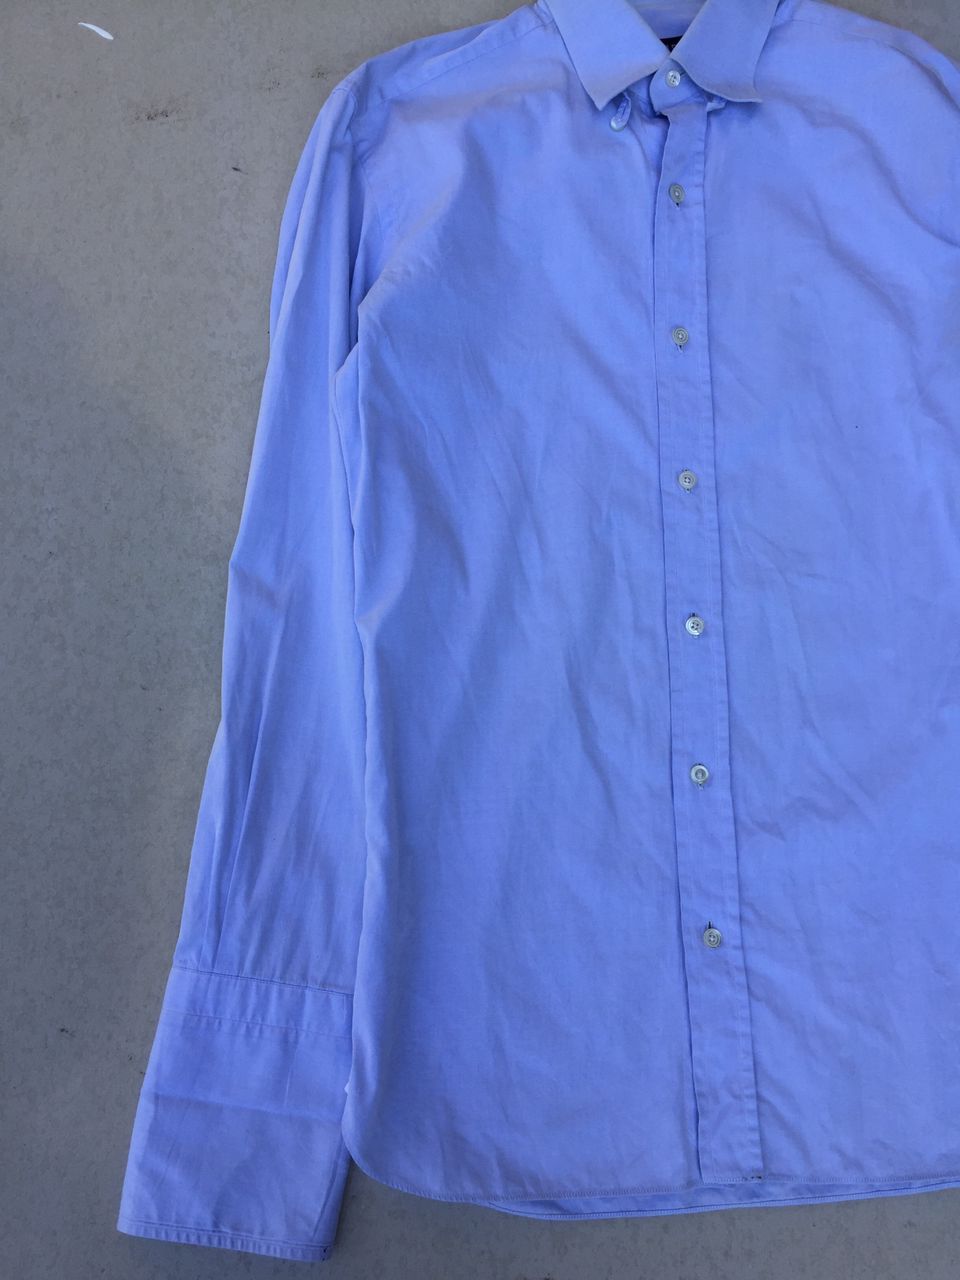 Tom Ford French Cuff button ups shirt - 4